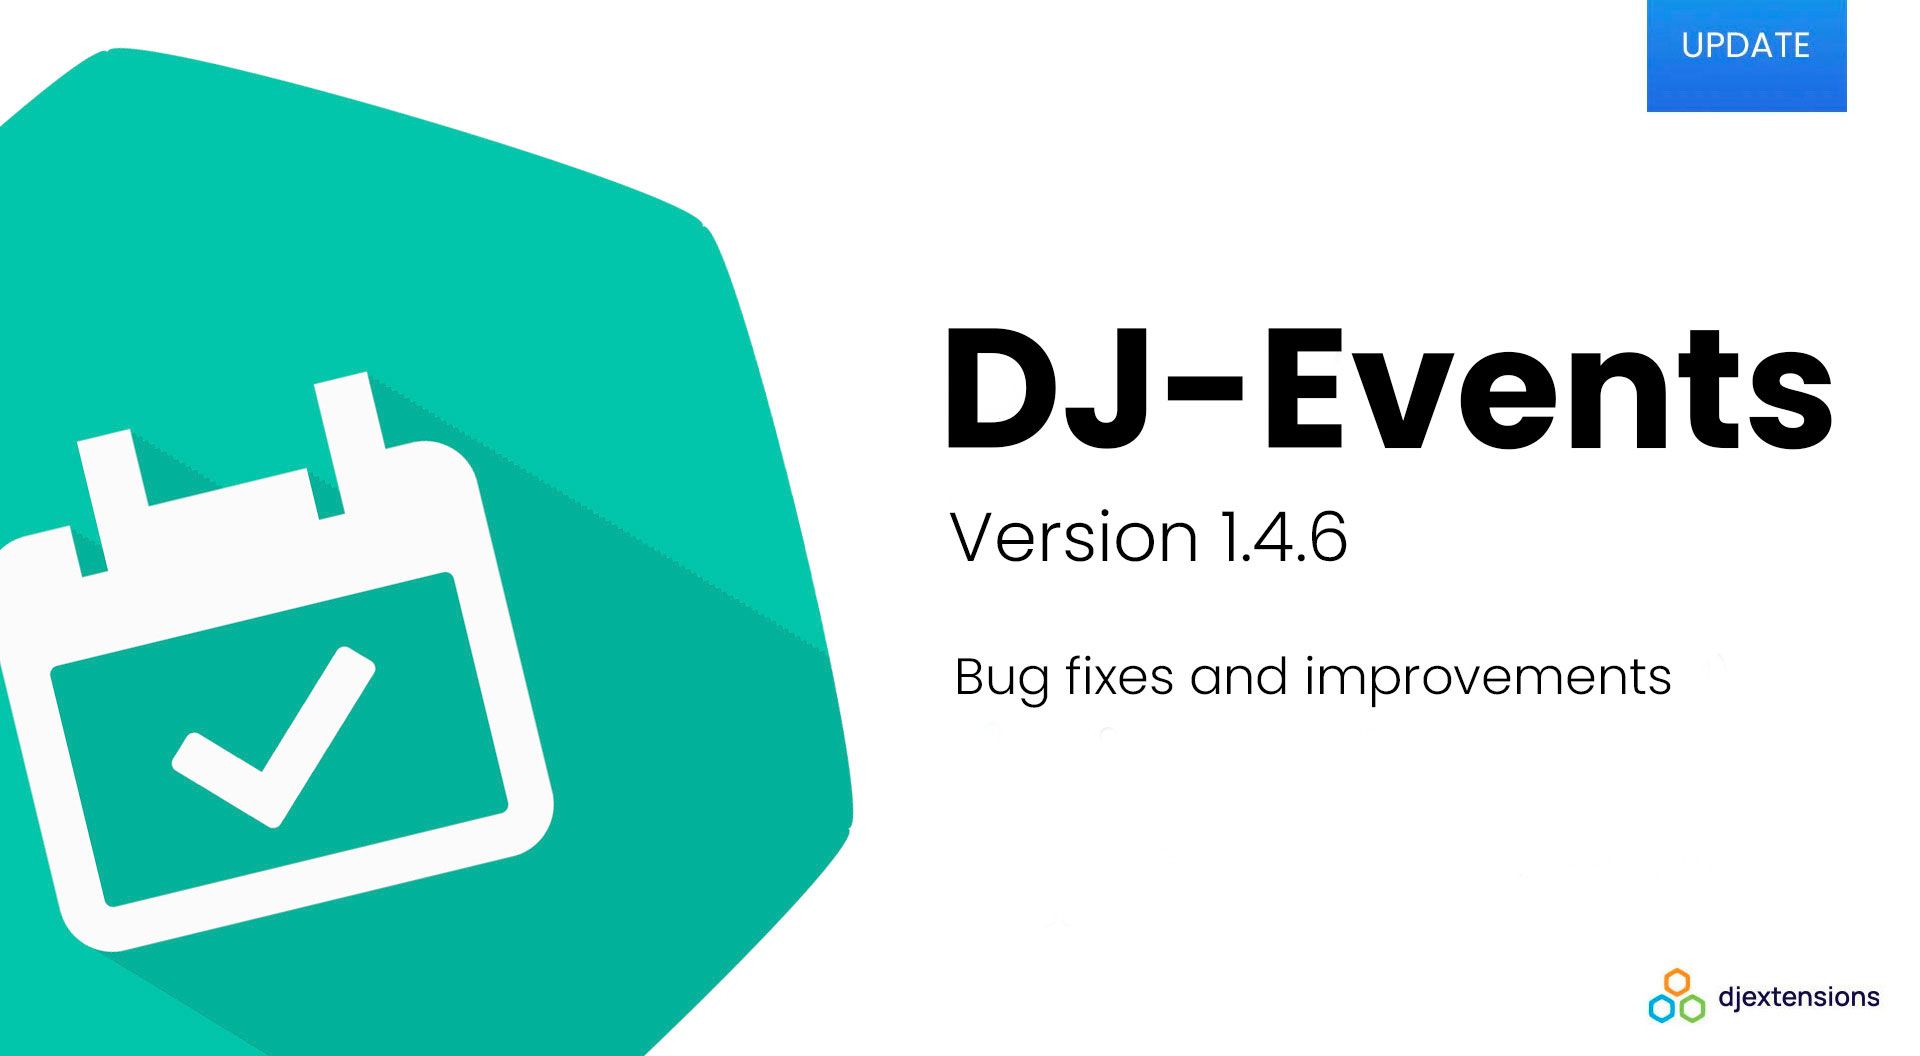 DJ-Events update brings a bunch of bug fixes and improvements